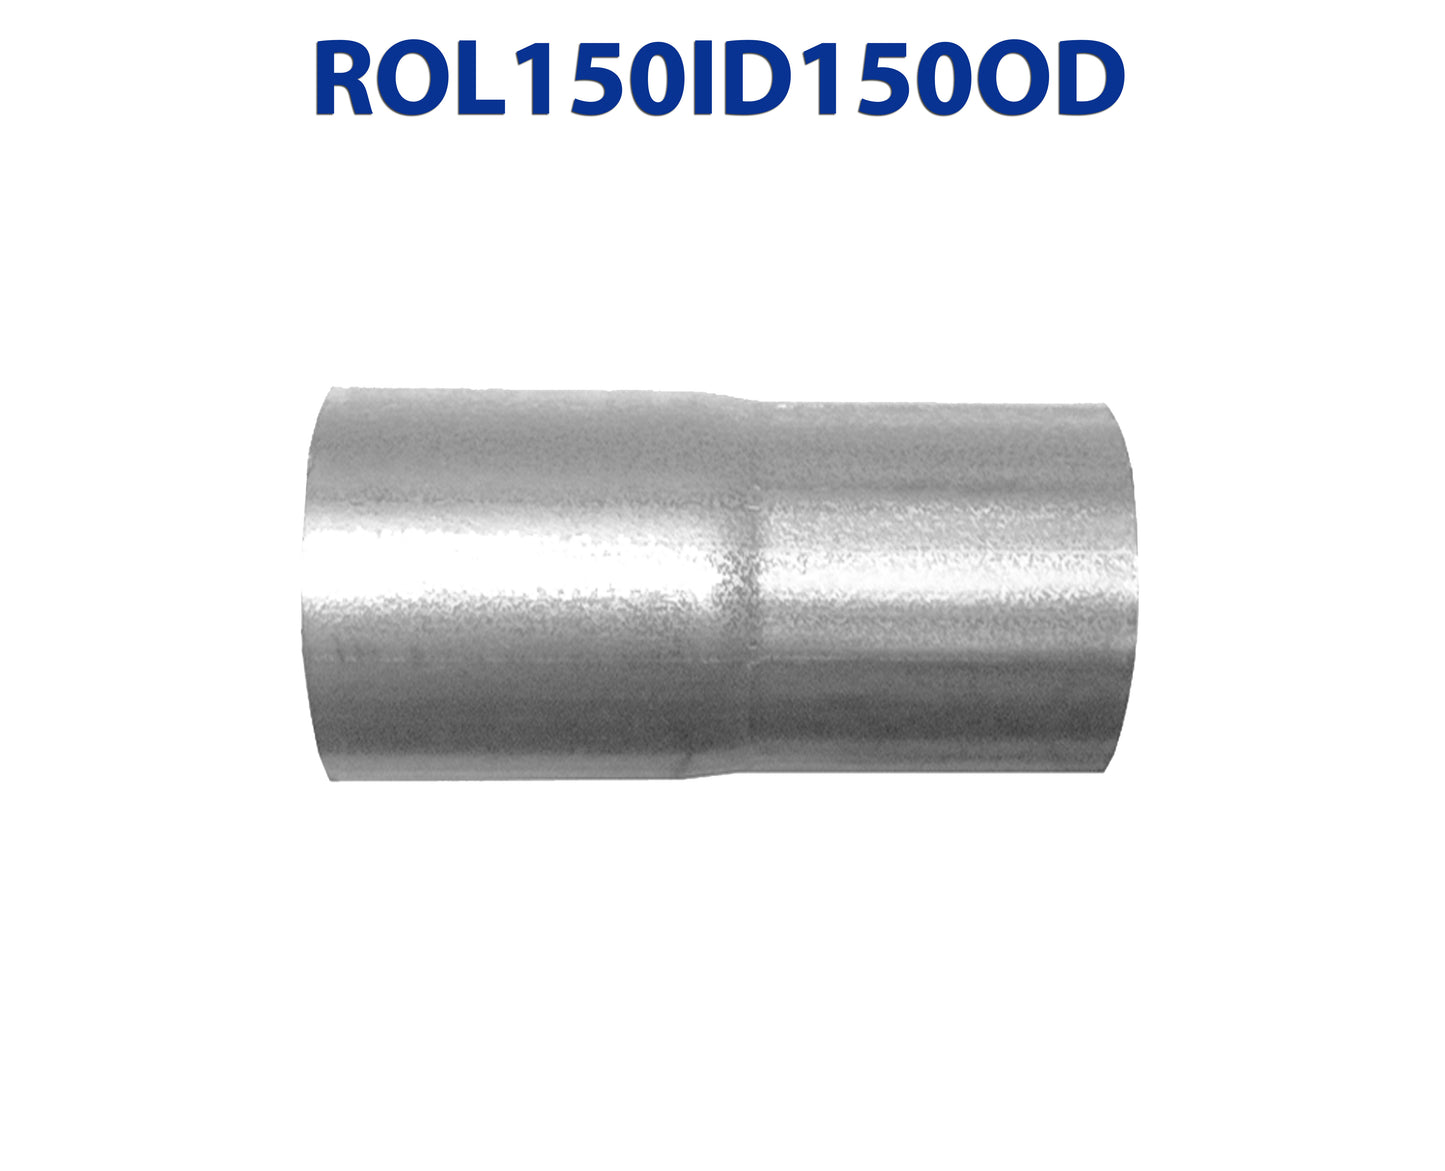 ROL150ID150OD 548531 1 1/2” ID to 1 1/2” OD Universal Exhaust Pipe to Component Coupling Connector